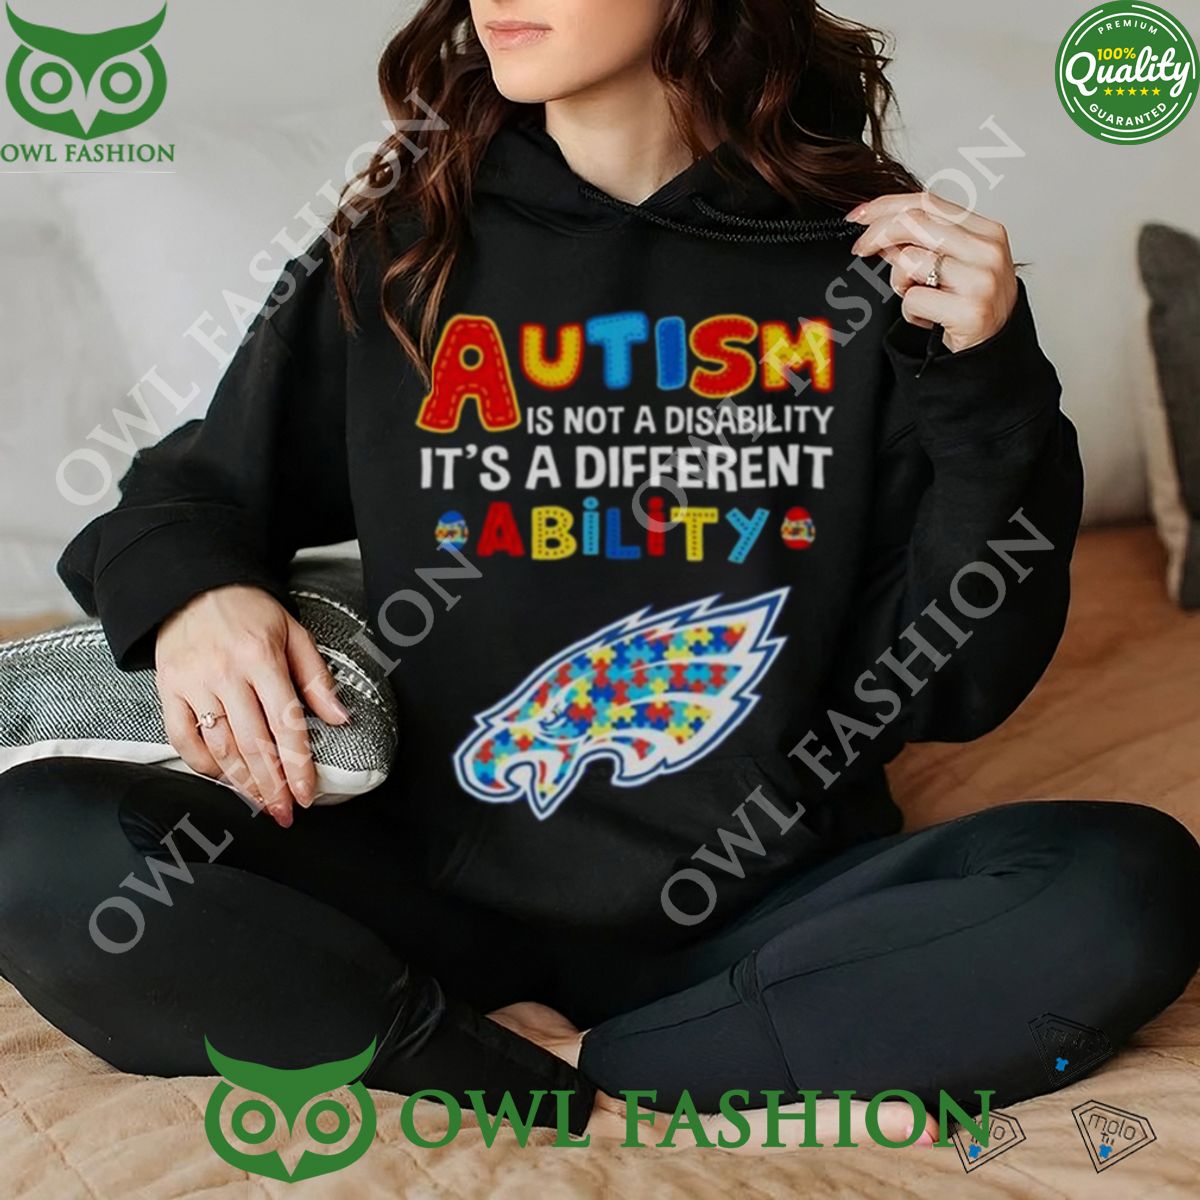 Philadelphia Eagles NFL Champion Autism 2D Shirt Hoodie Out of the world